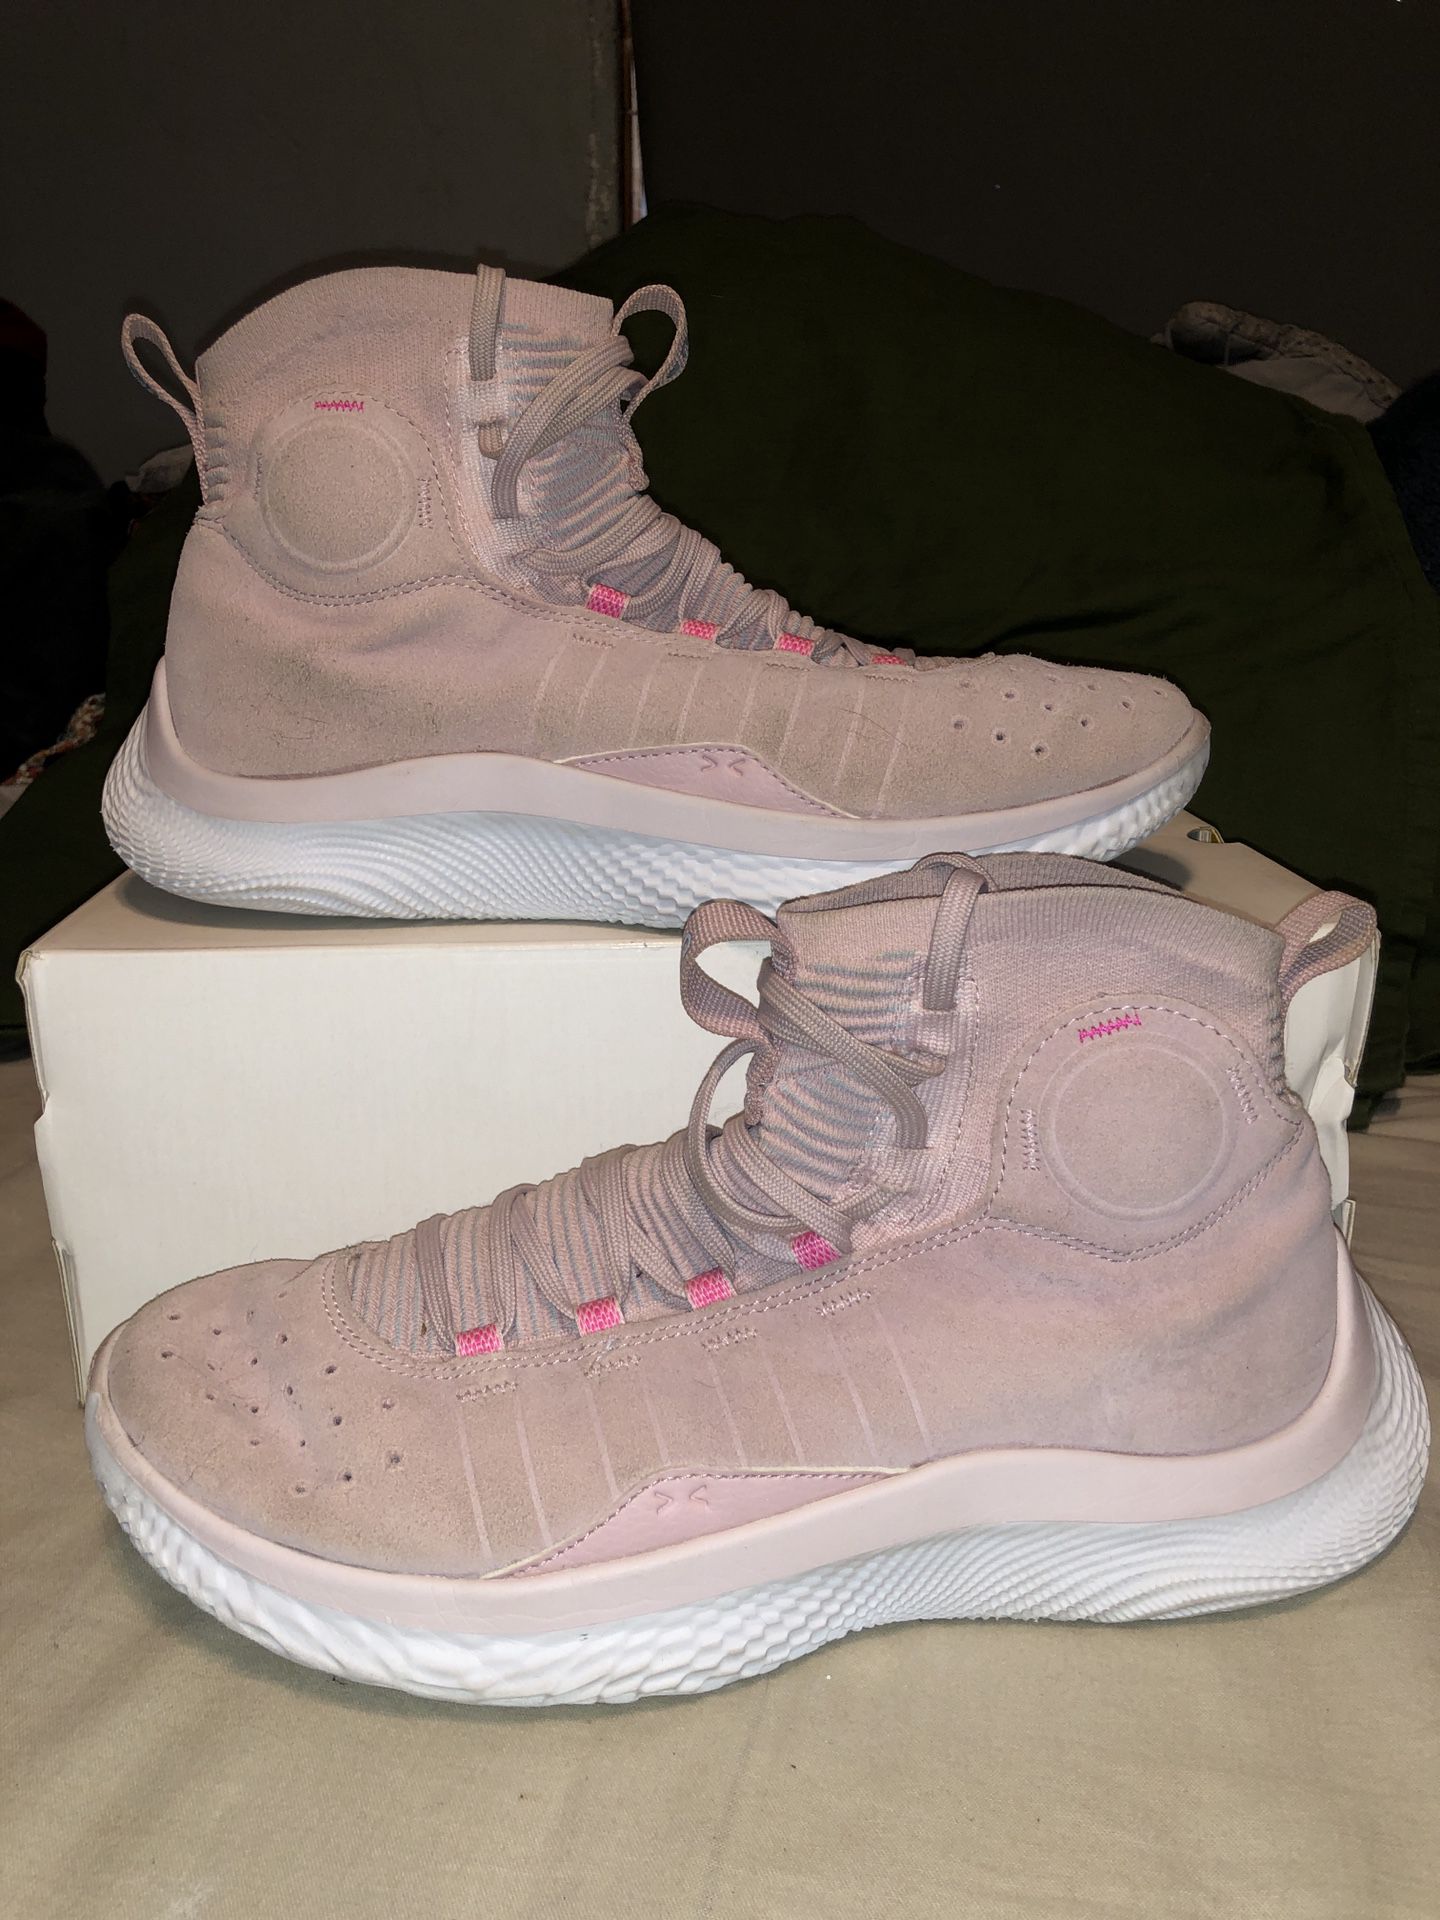 Under Armour Curry 4 FloTro 'Retro Pink' Size 10